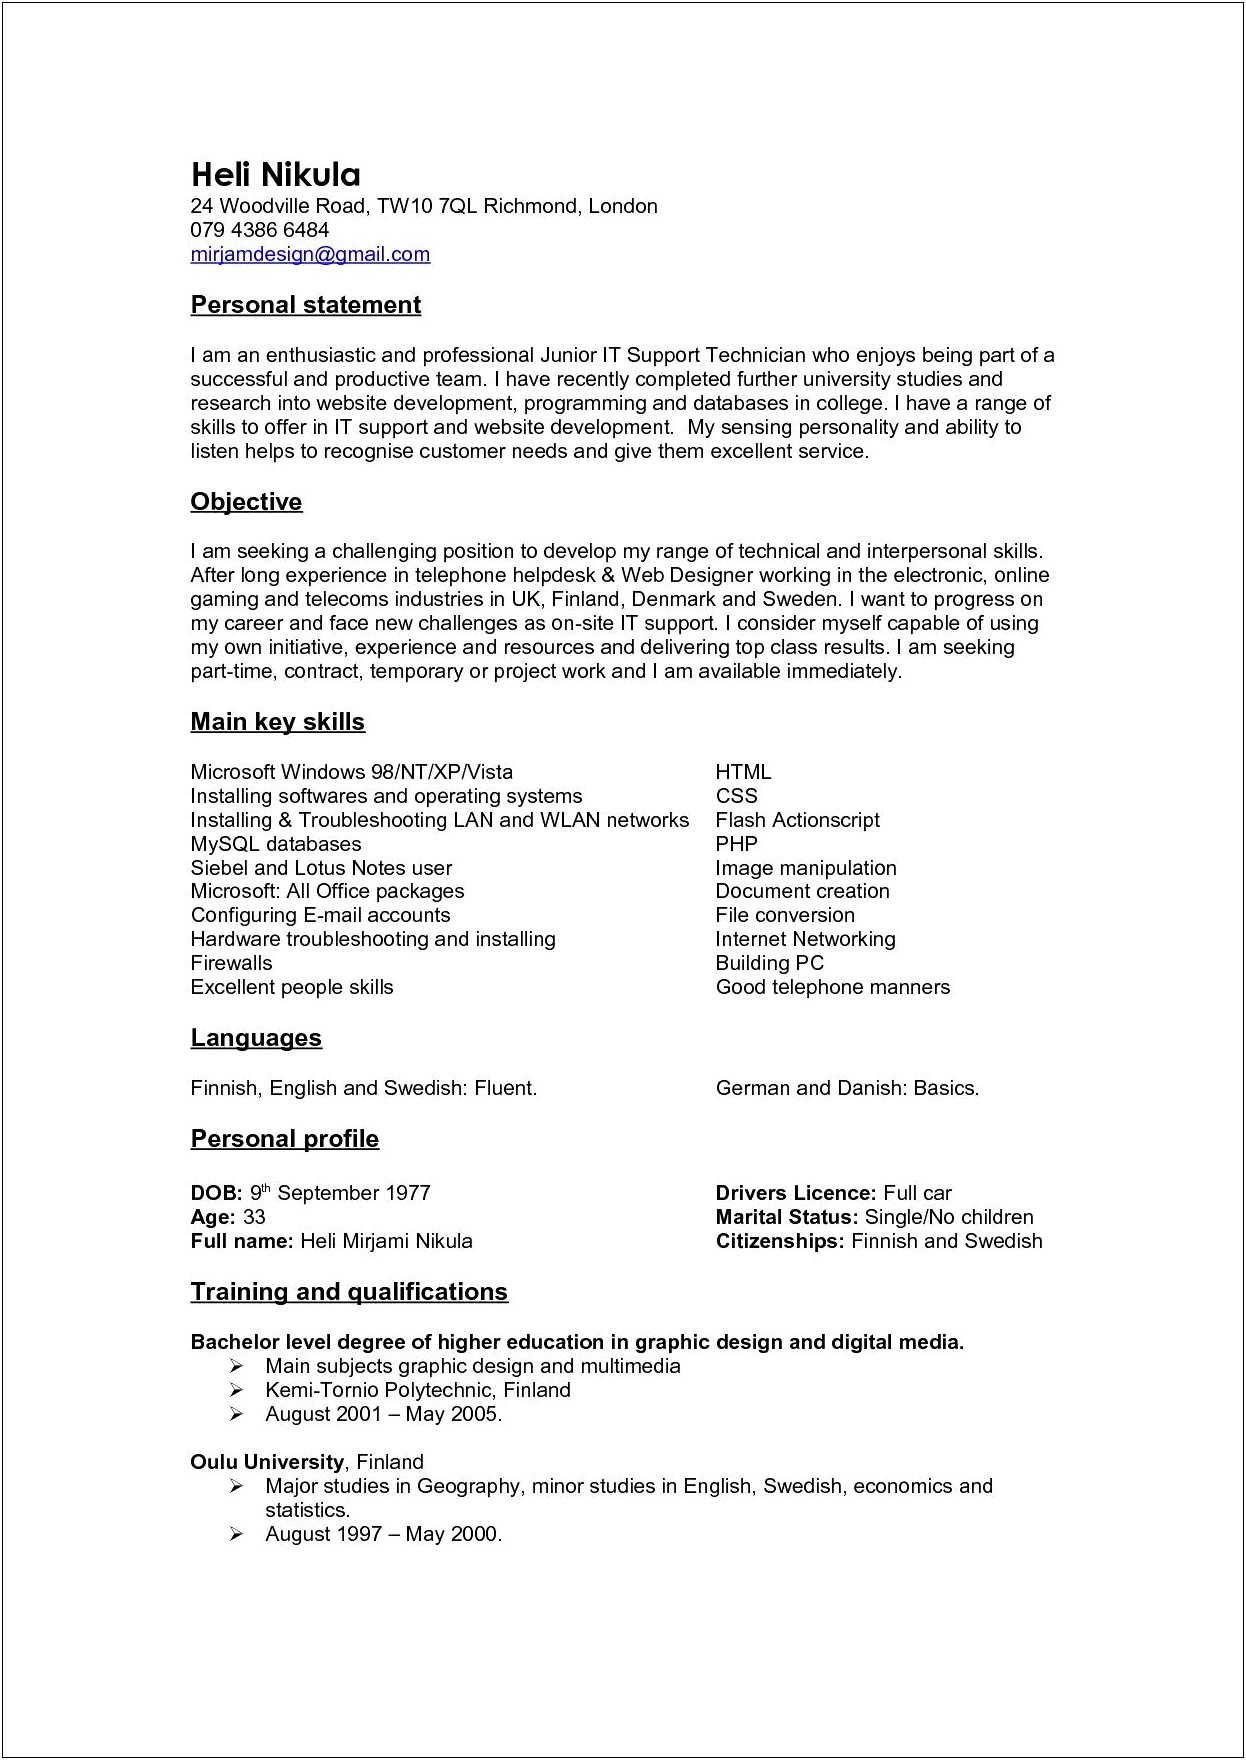 Example Branding Statement In A Resume